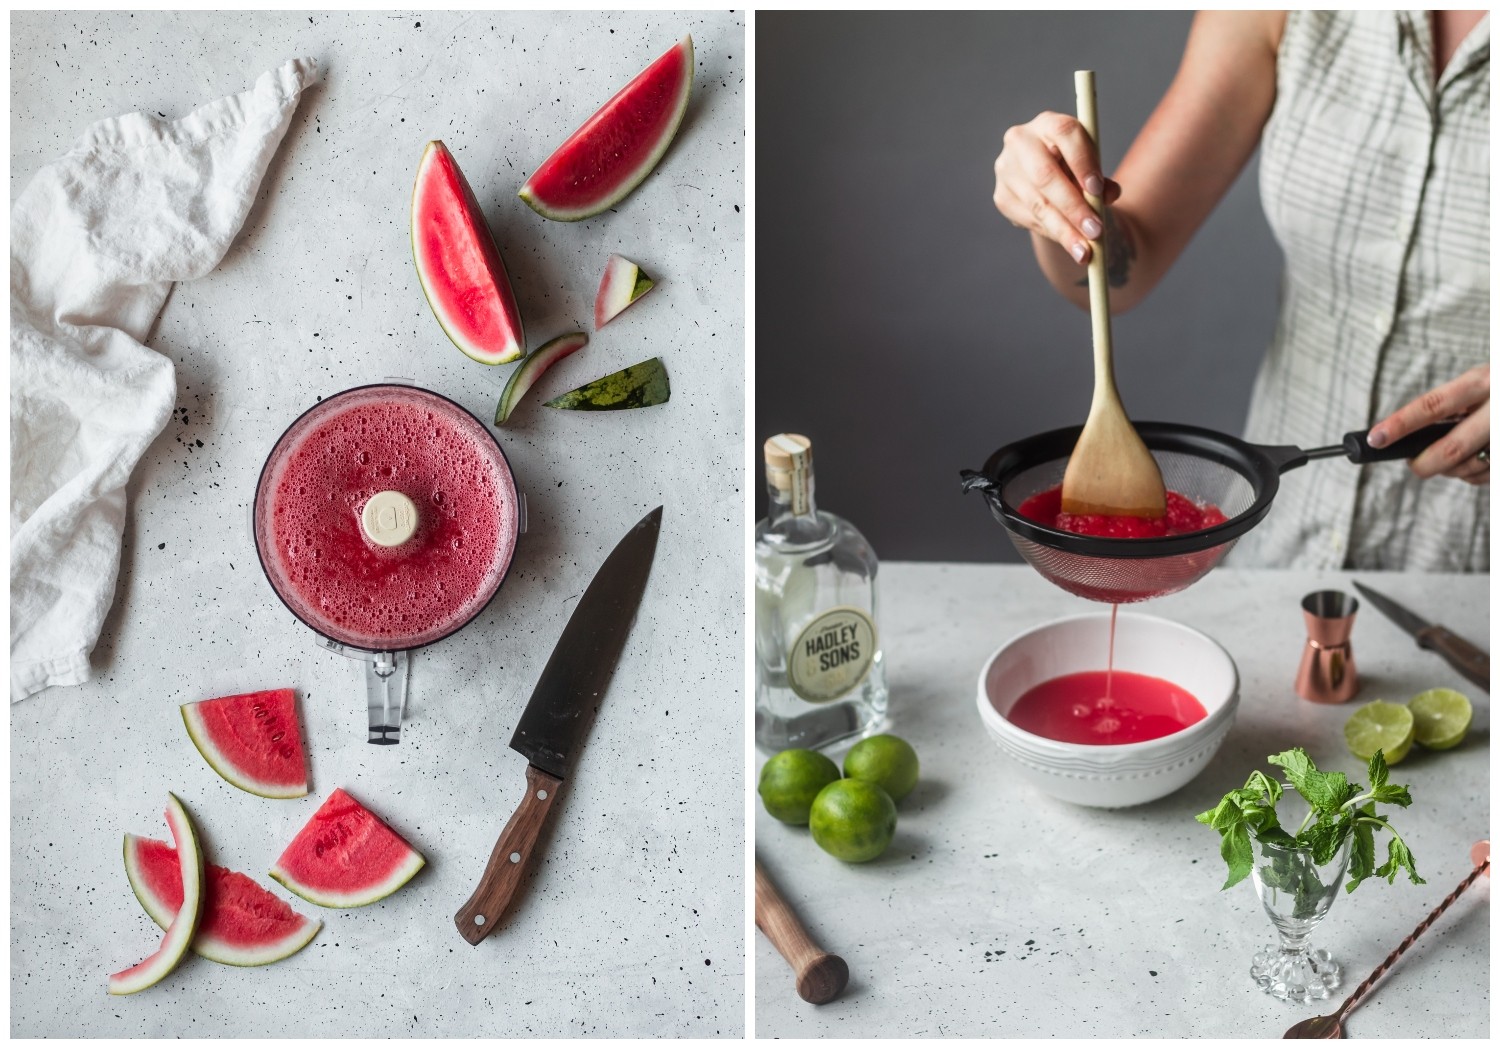 Two shots of a watermelon being juiced. On the left, the watermelon juice is in a food processor on a grey table. On the right, a woman's hand is straining watermelon juice into a white bowl on a white table.